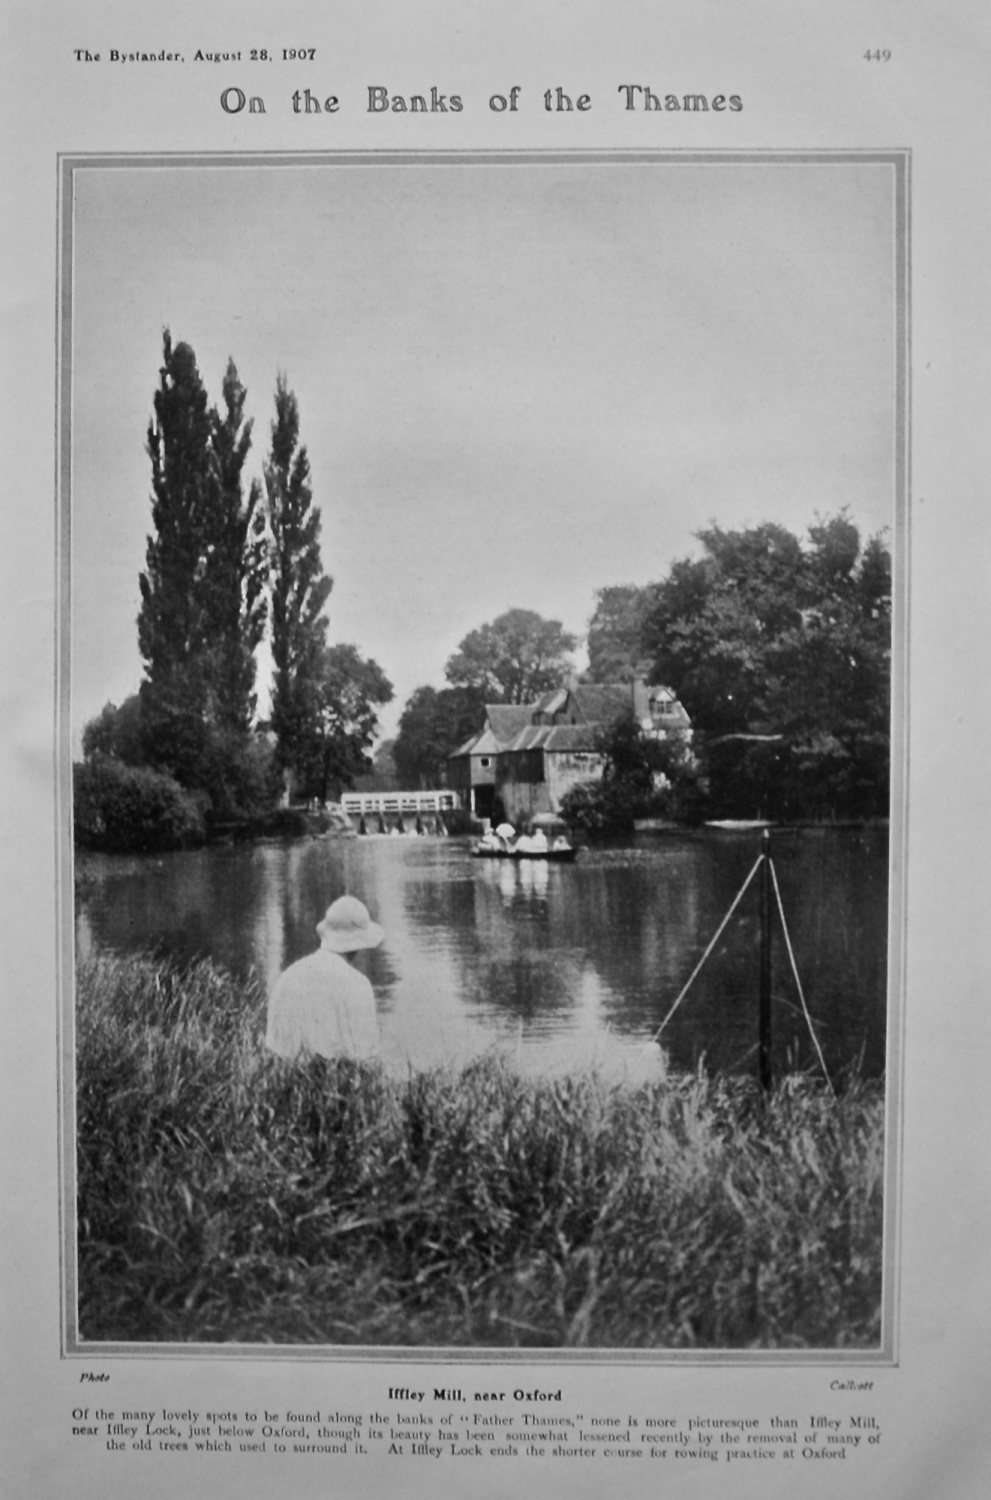 On the Banks of the Thames : Iffley Mill, near Oxford.  1907.